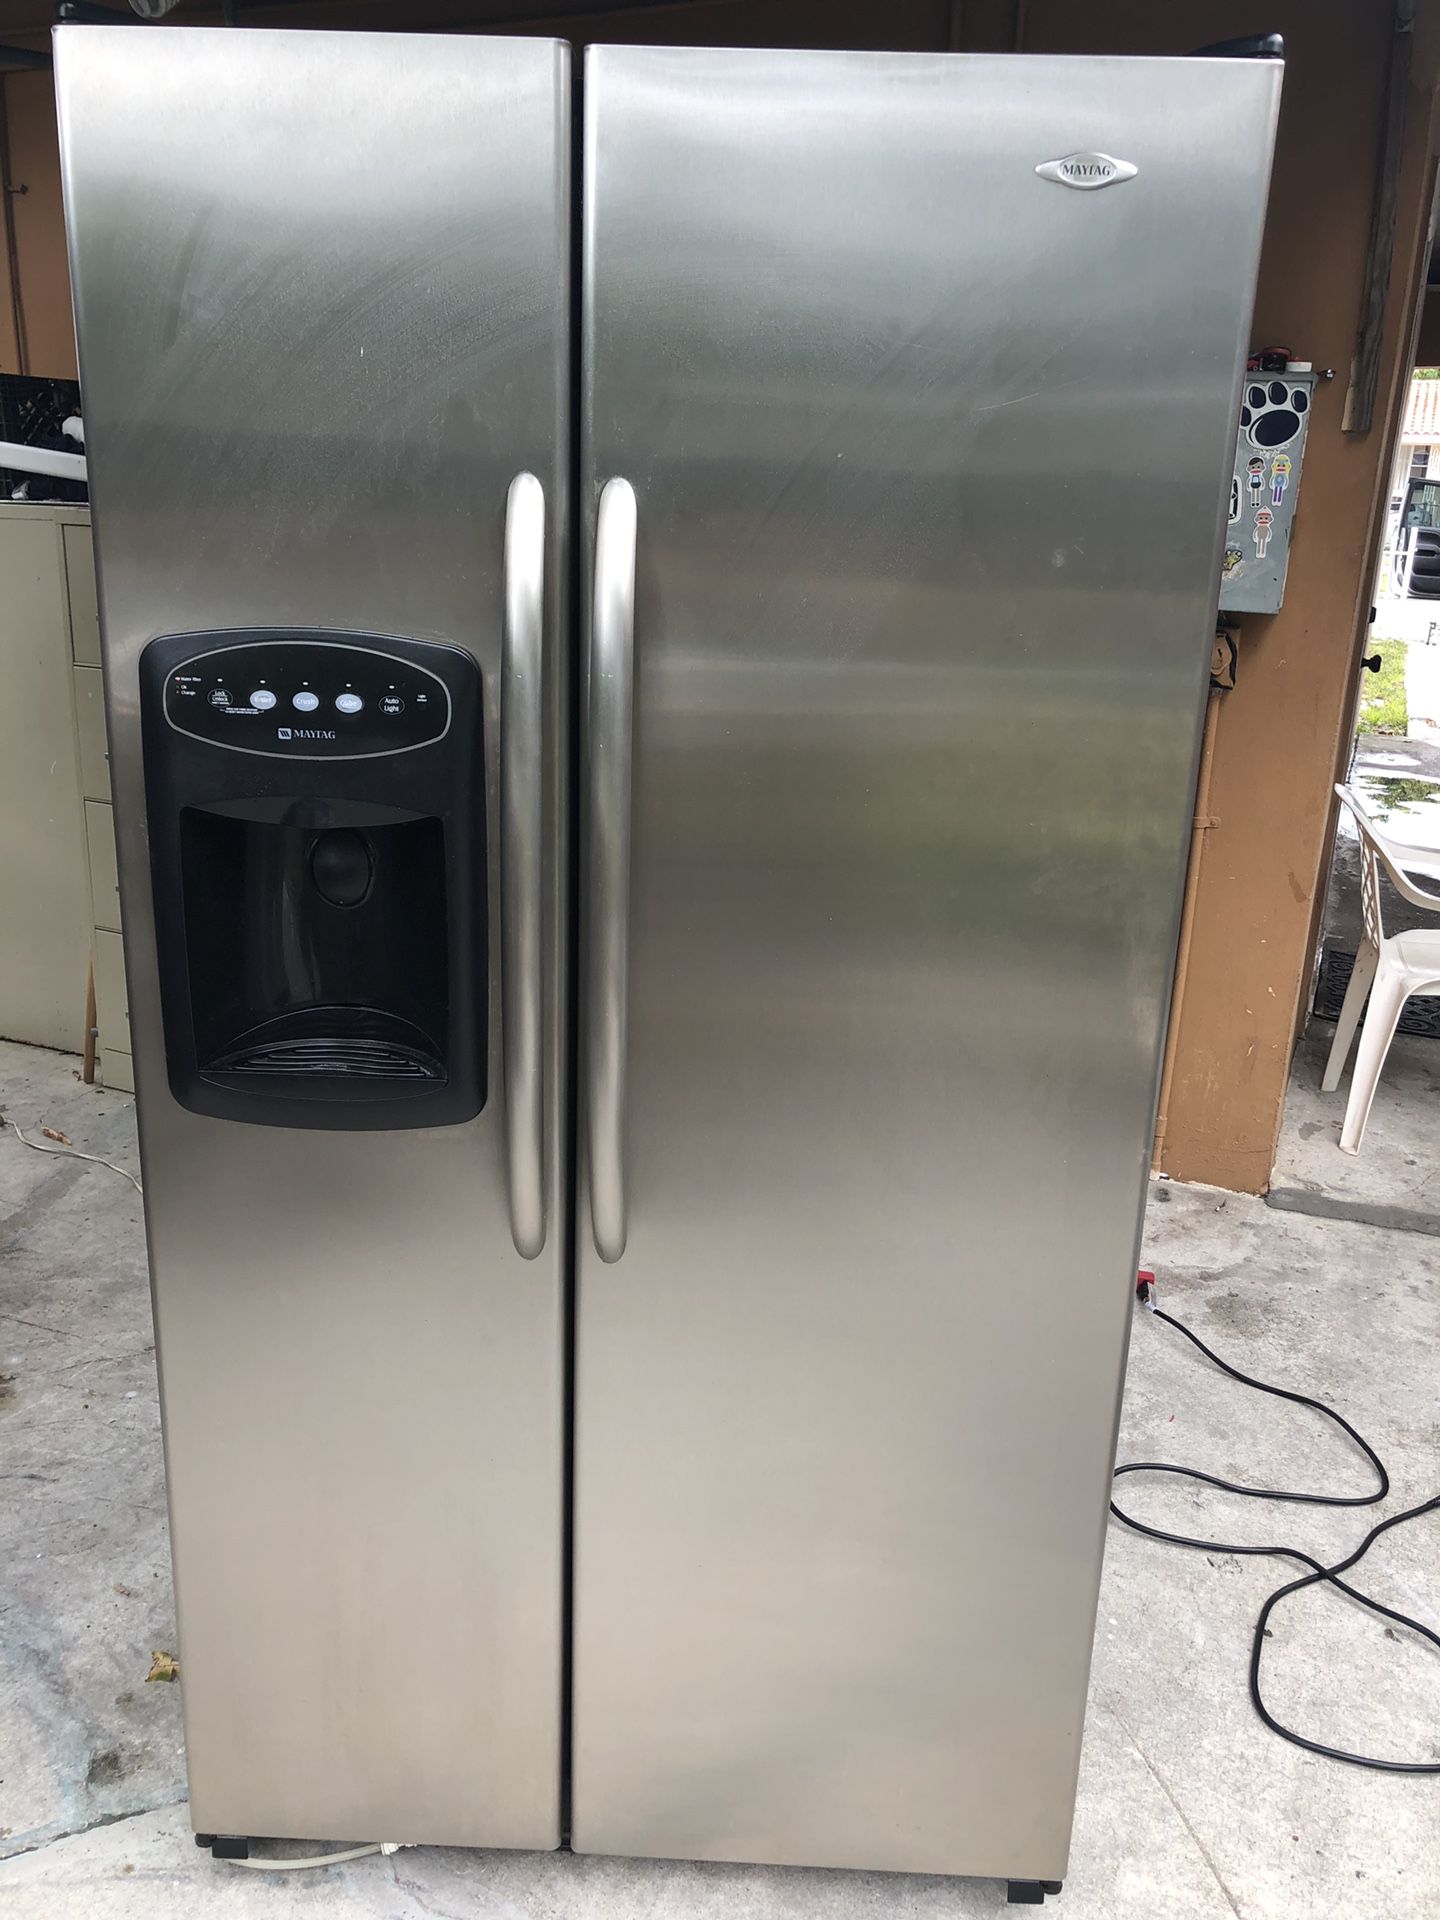 Maytag nevera Refrigerator refrigerador fridge stainless steel side by side 36x69x33 good condition